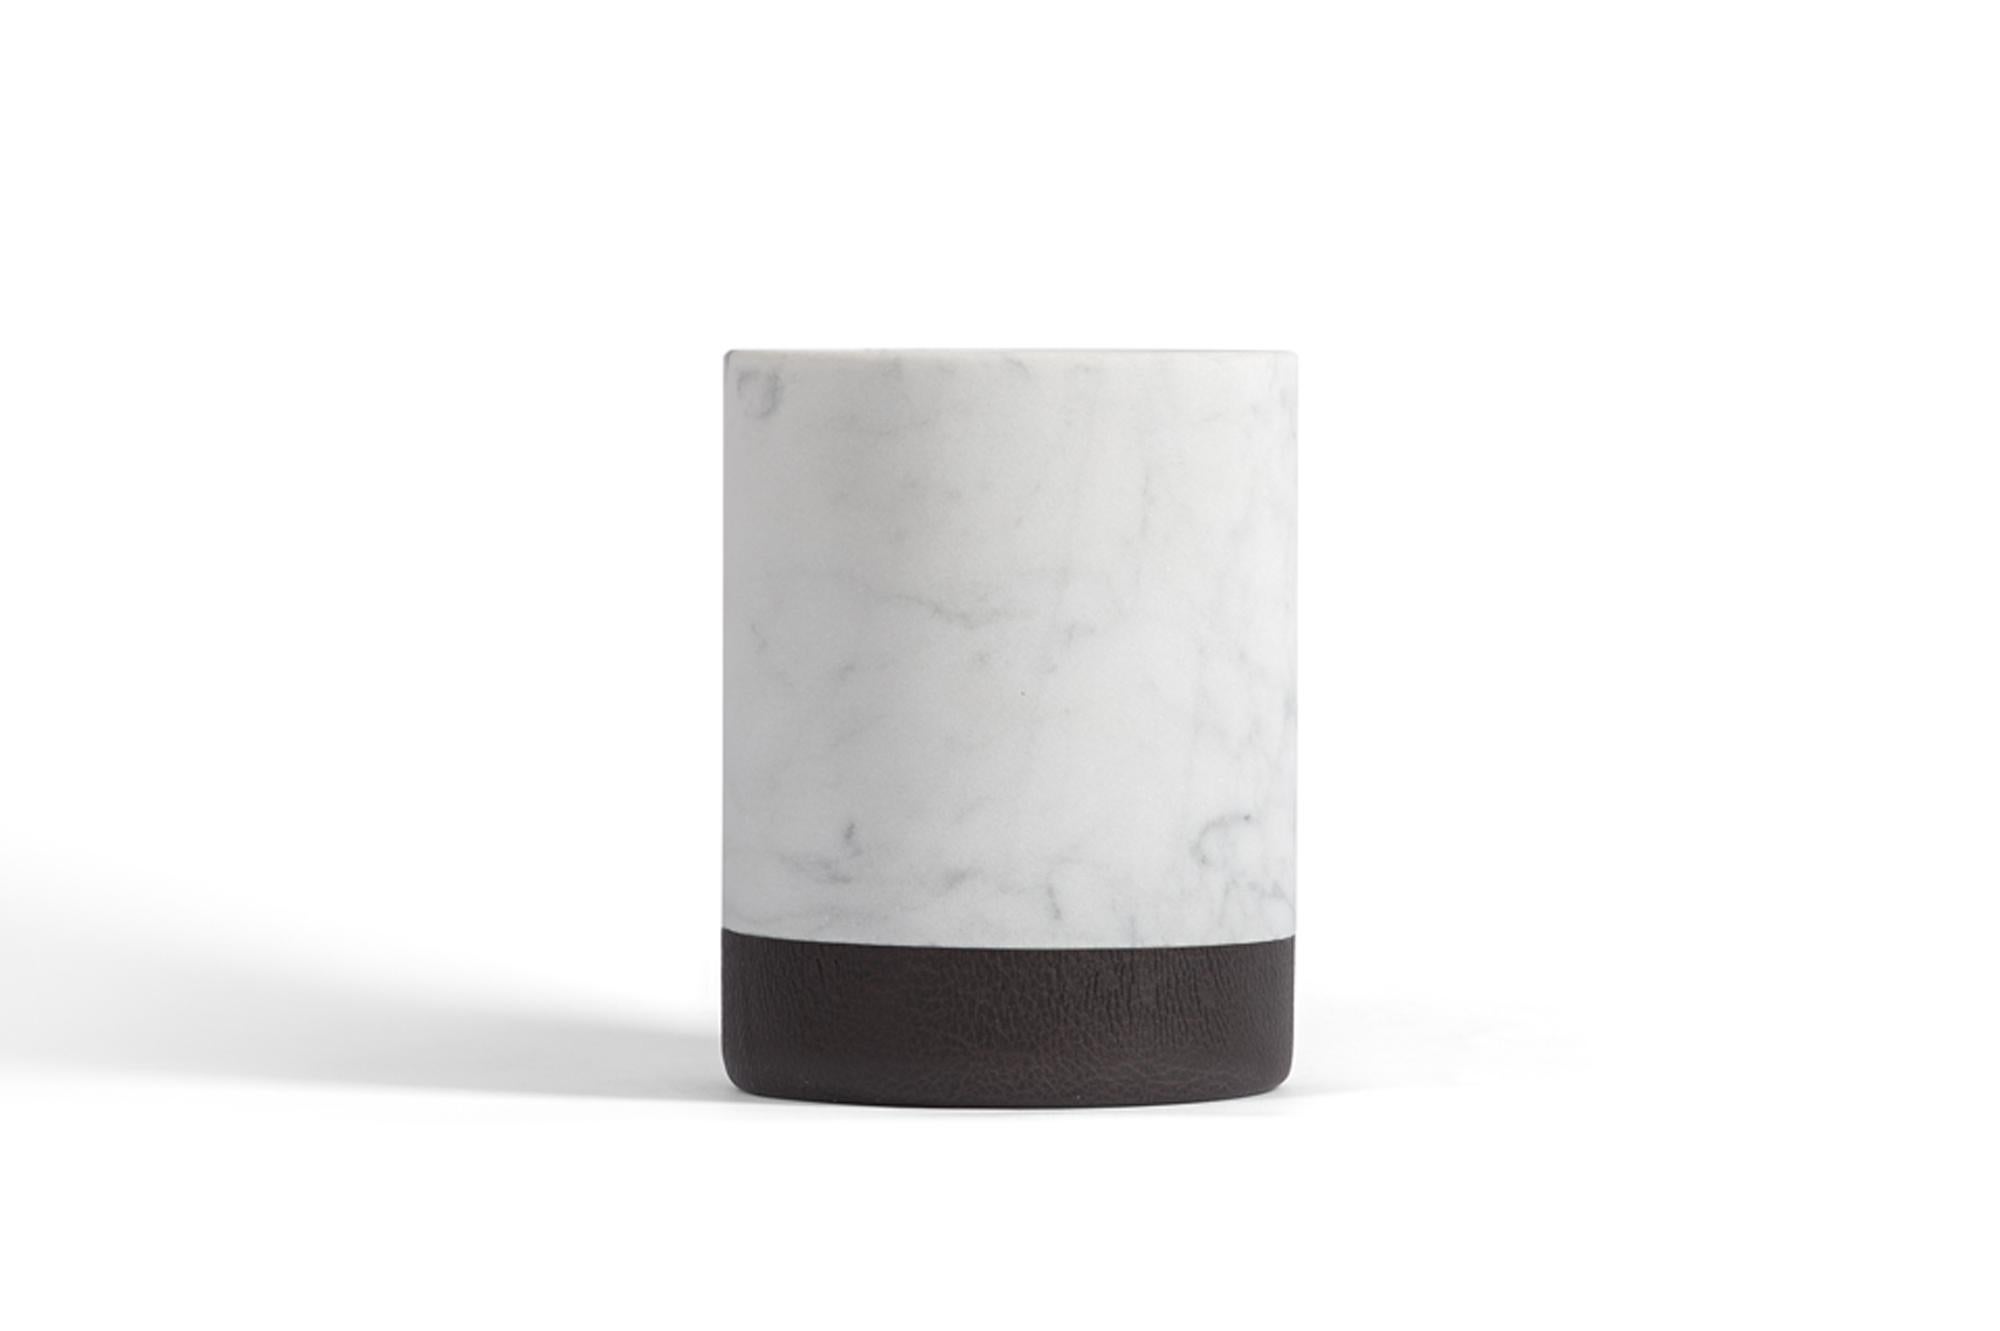 Salvatori Lui & Lei Candle Holder in Bianco Carrara Marble by Vincent Van Duysen For Sale